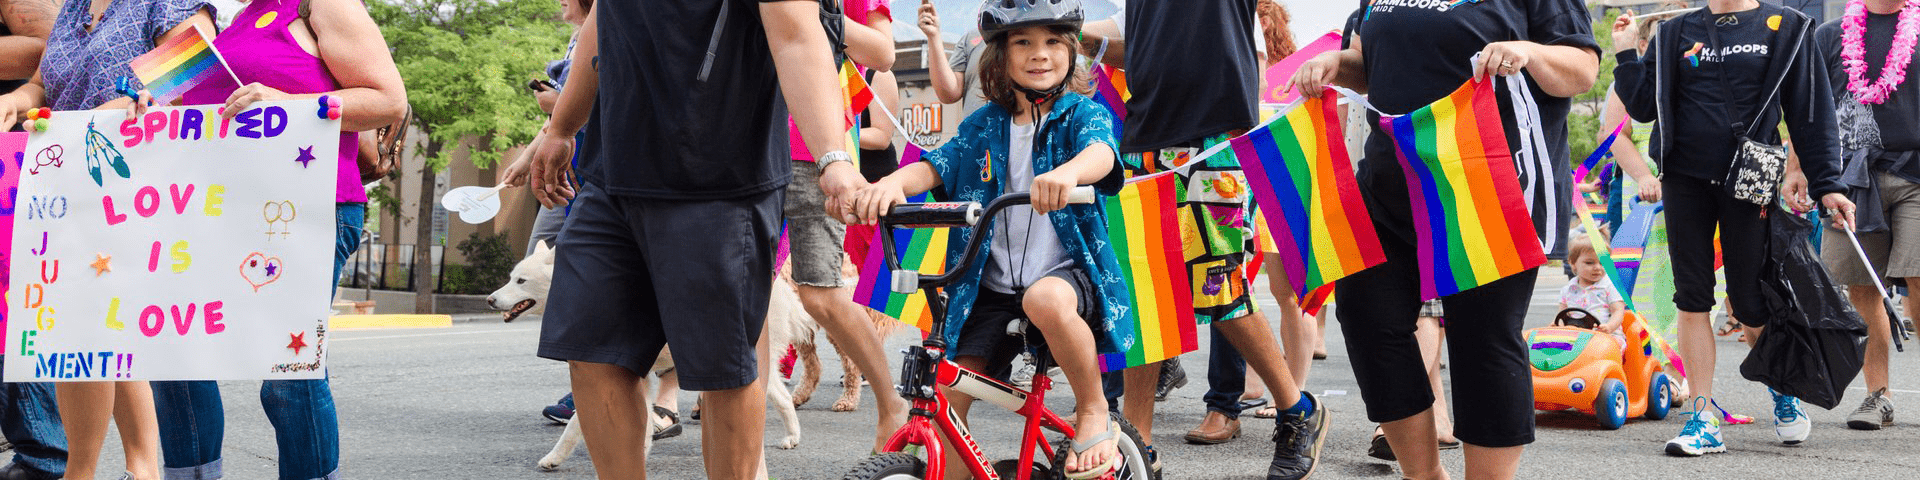 Young girl rides bike in 2017 Pride Parade in crowd of marchers carrying signs and rainbow flags